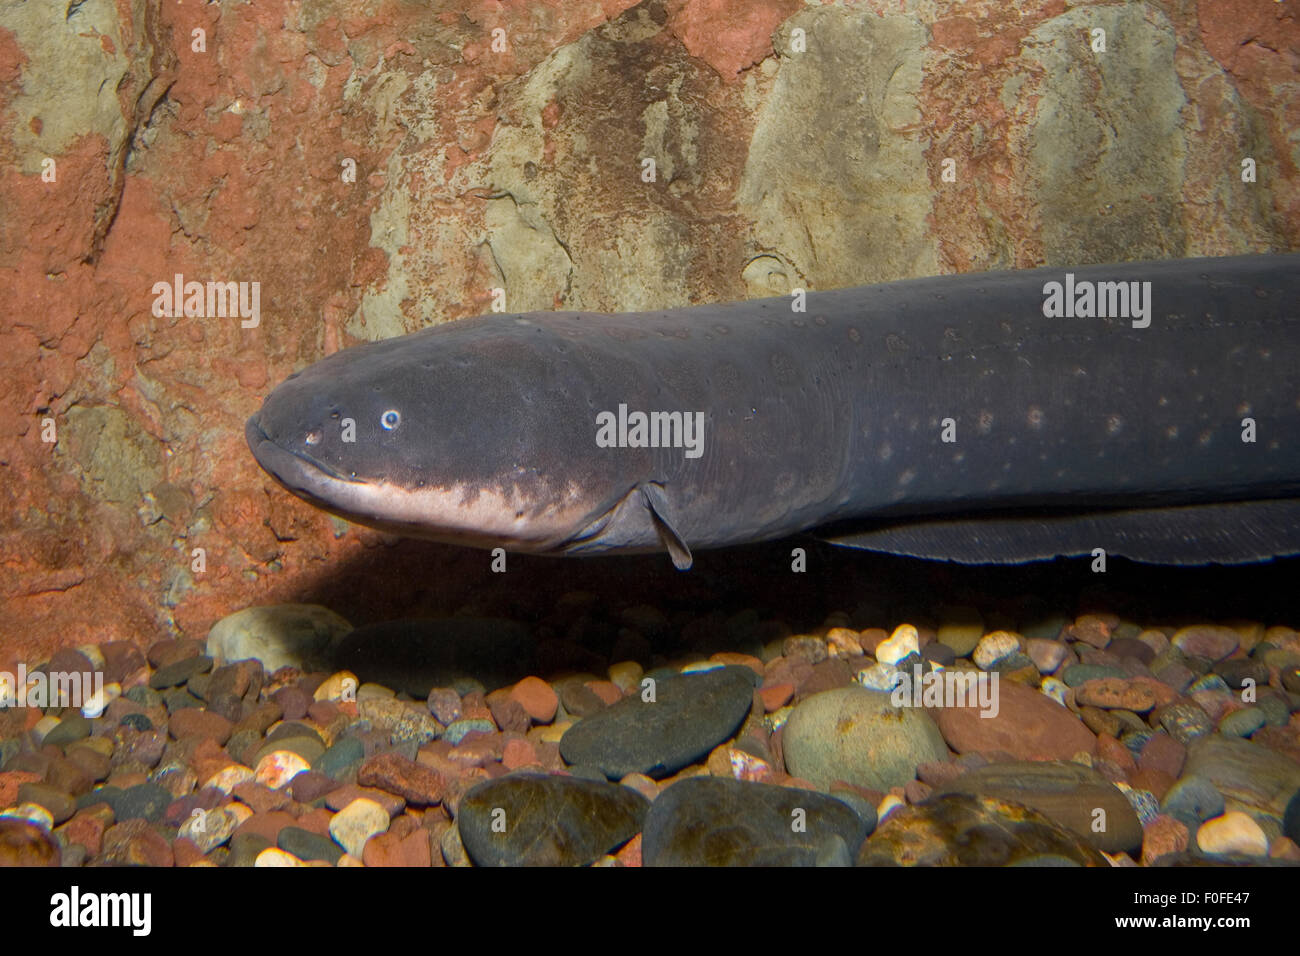 An Electric eel, Electrophorus electricus, from the Amazon River in Brazil  Stock Photo - Alamy